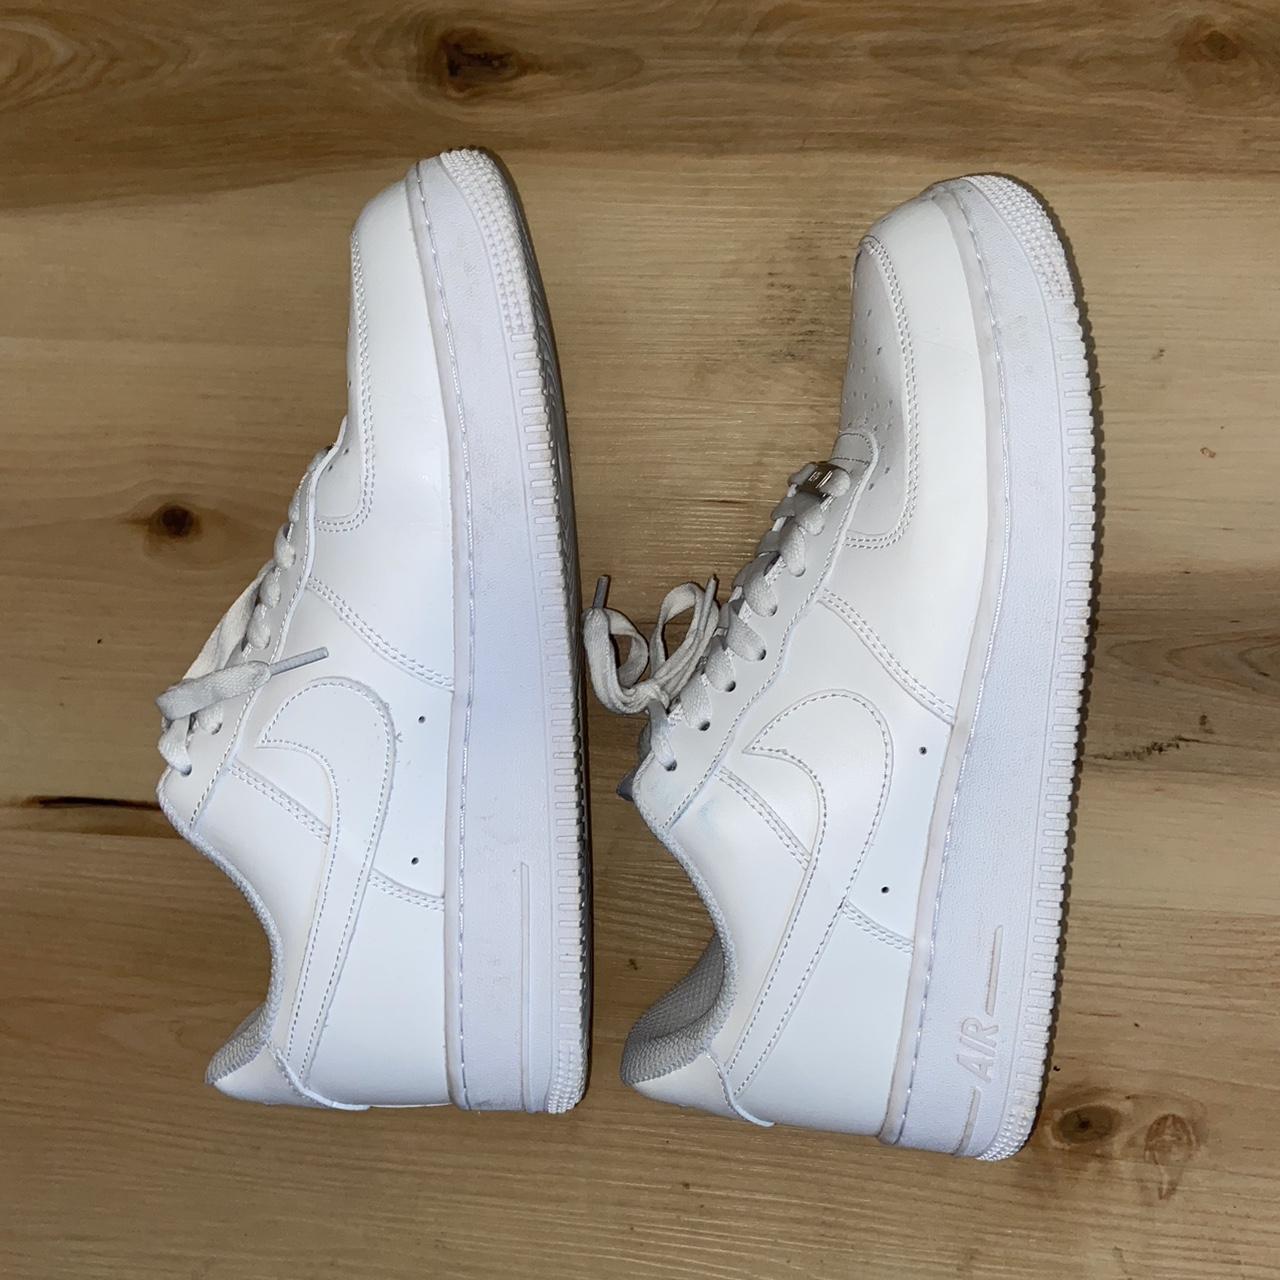 Nike Air Force 1 Size 11 Shipping as is I’ve only... - Depop